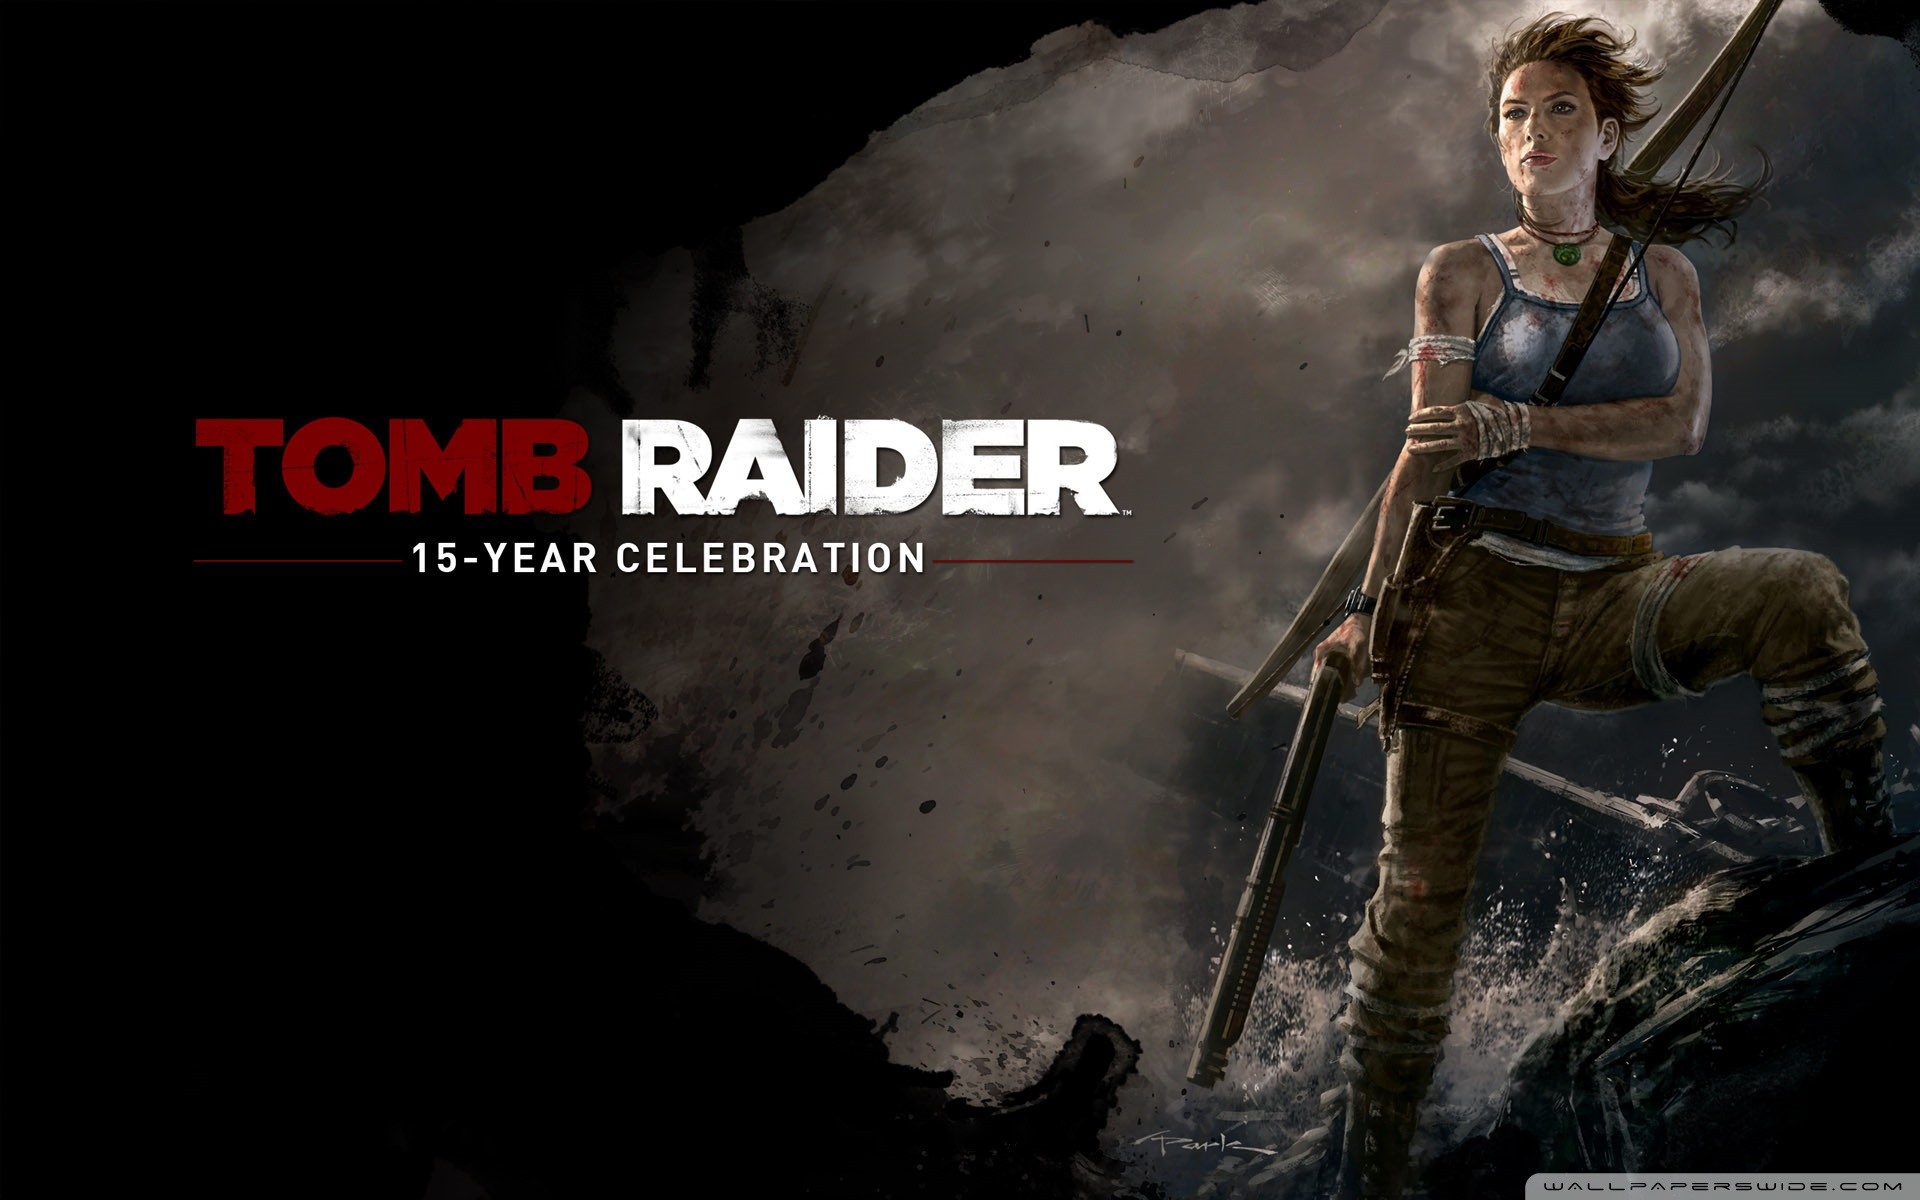 General 1920x1200 Tomb Raider video games brunette necklace Video Game Heroes video game girls women video game art Lara Croft (Tomb Raider) Tomb Raider: 15-Year Celebration